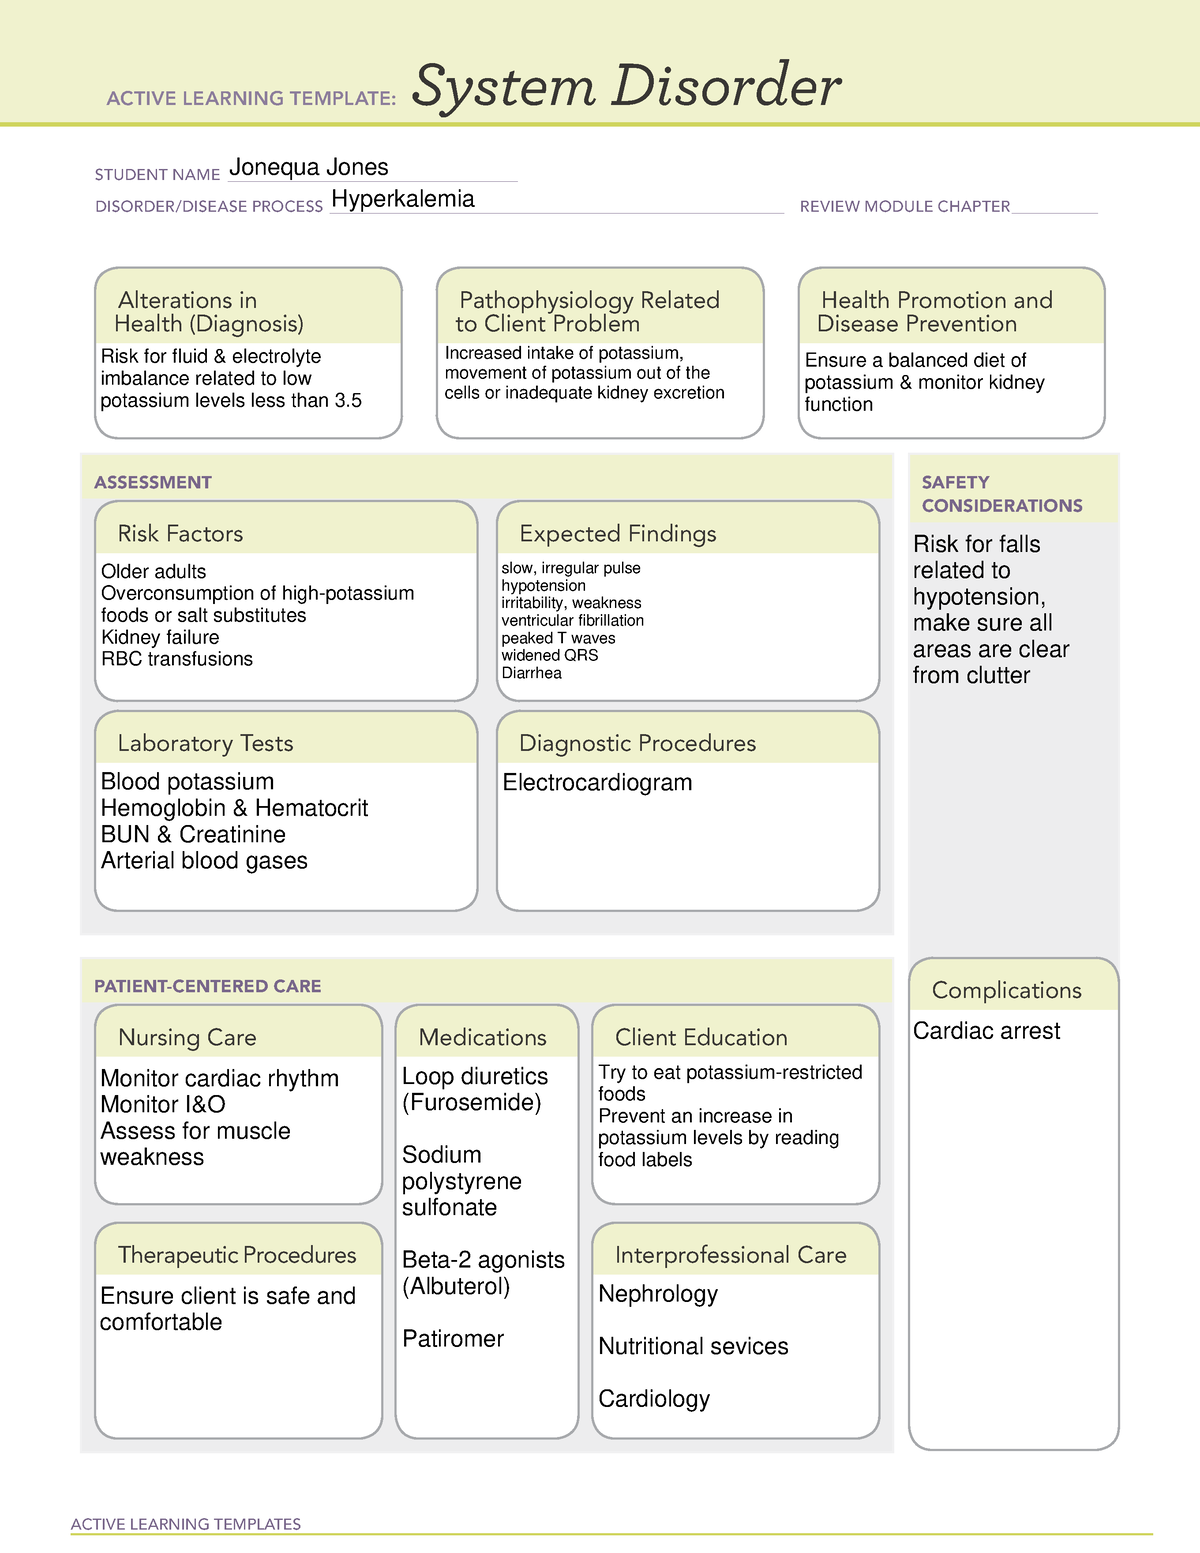 hyperkalemia-system-disorder-form-active-learning-templates-system